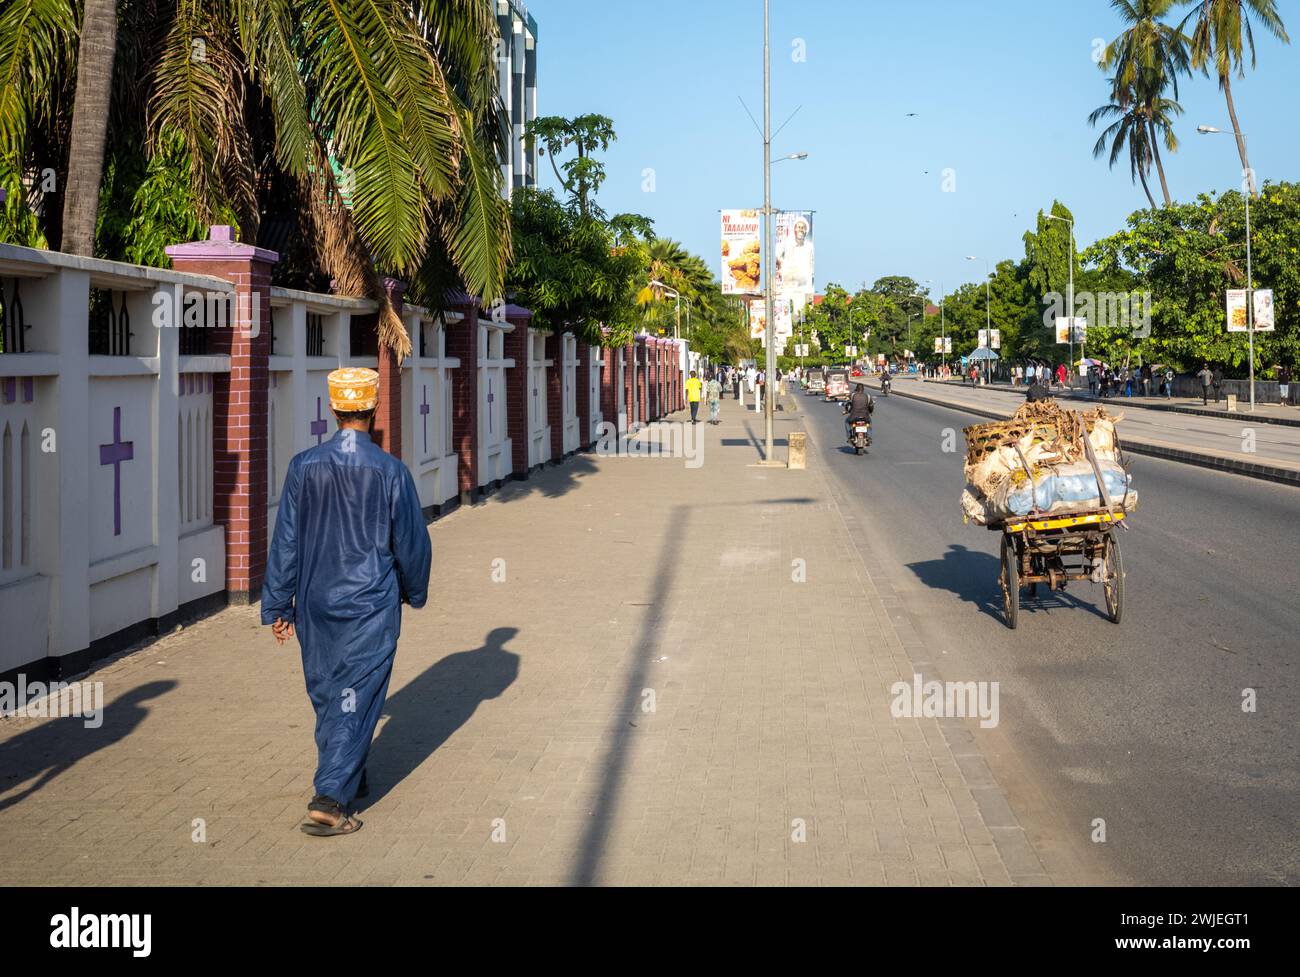 A muslim man wearing a traditional kanzu long tunic and kofia cap walks past the Azania Front Cathedral in Dar es Salaam, Tanzania. Stock Photo